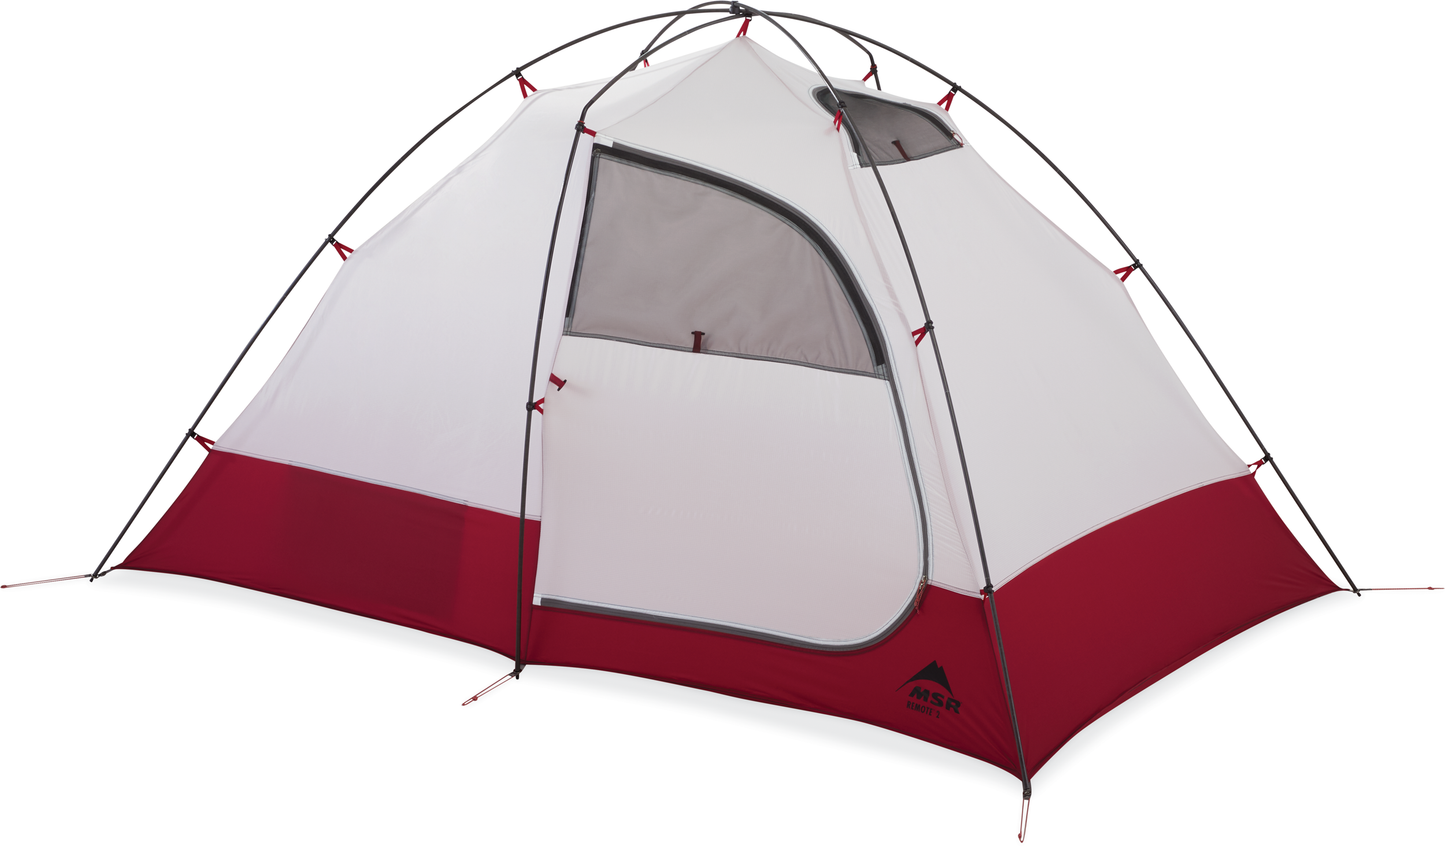 Remote 2 Two-Person Mountaineering Tent - by MSR